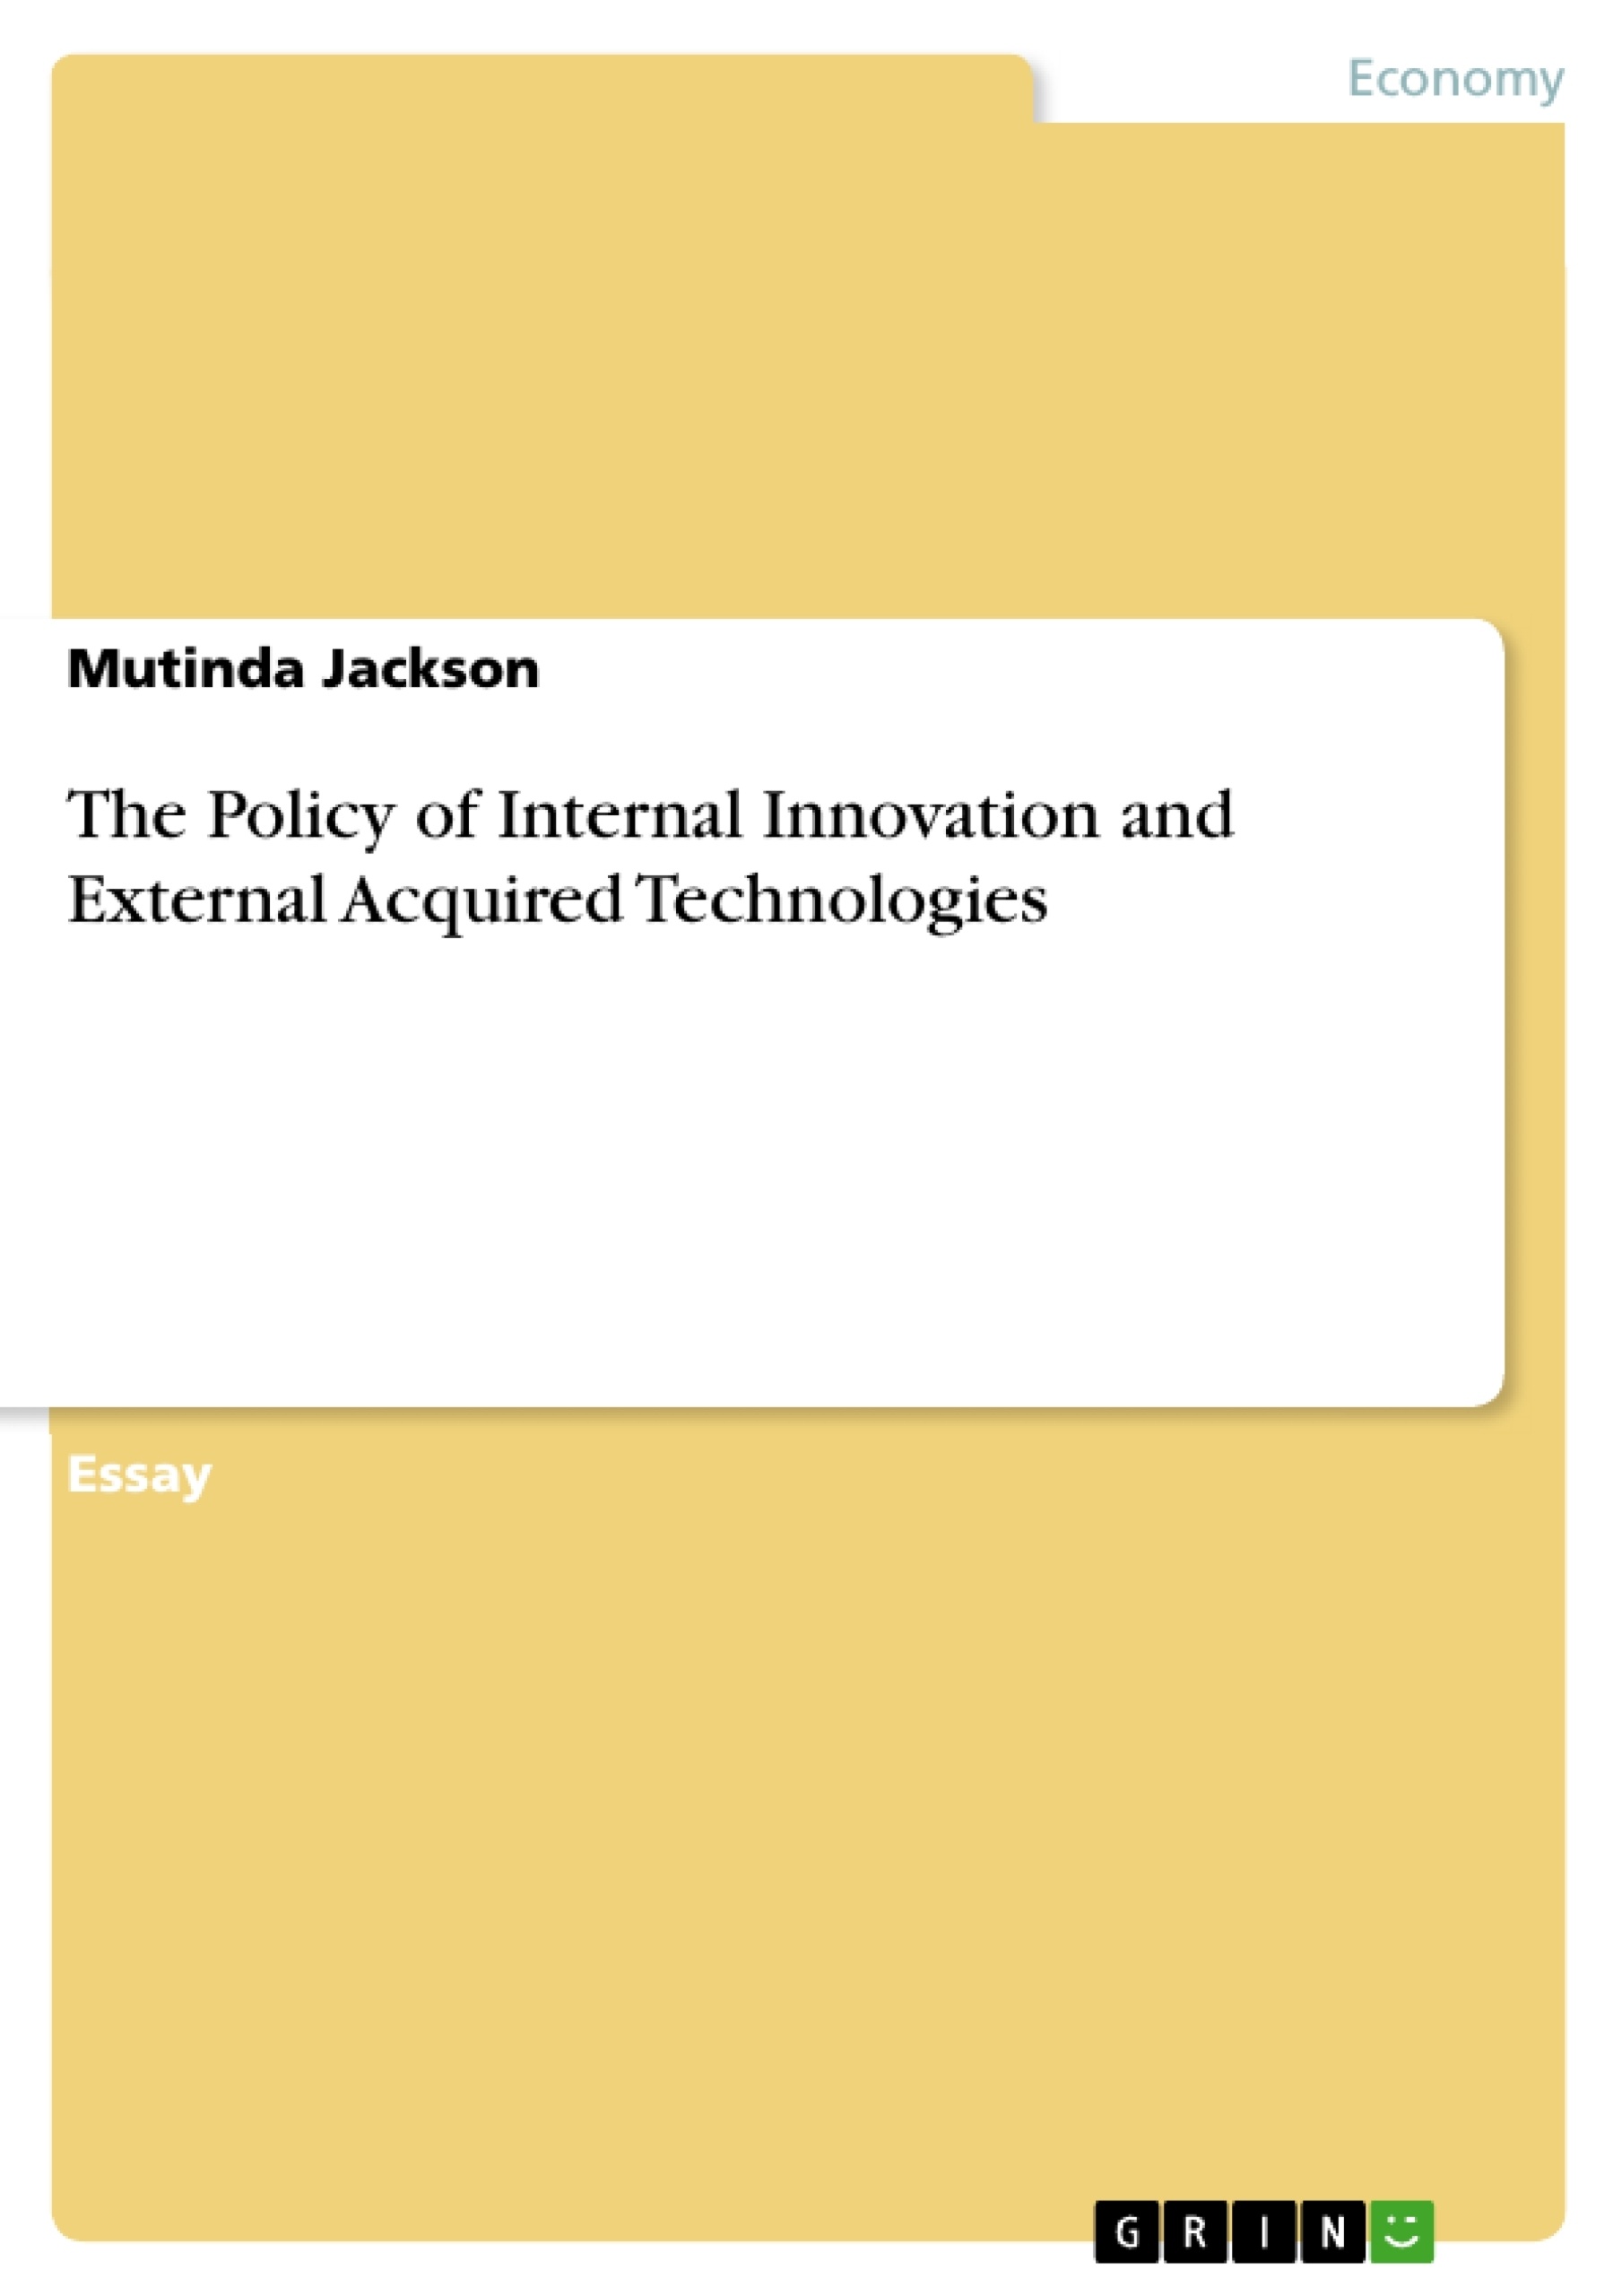 Título: The Policy of Internal Innovation and External Acquired Technologies